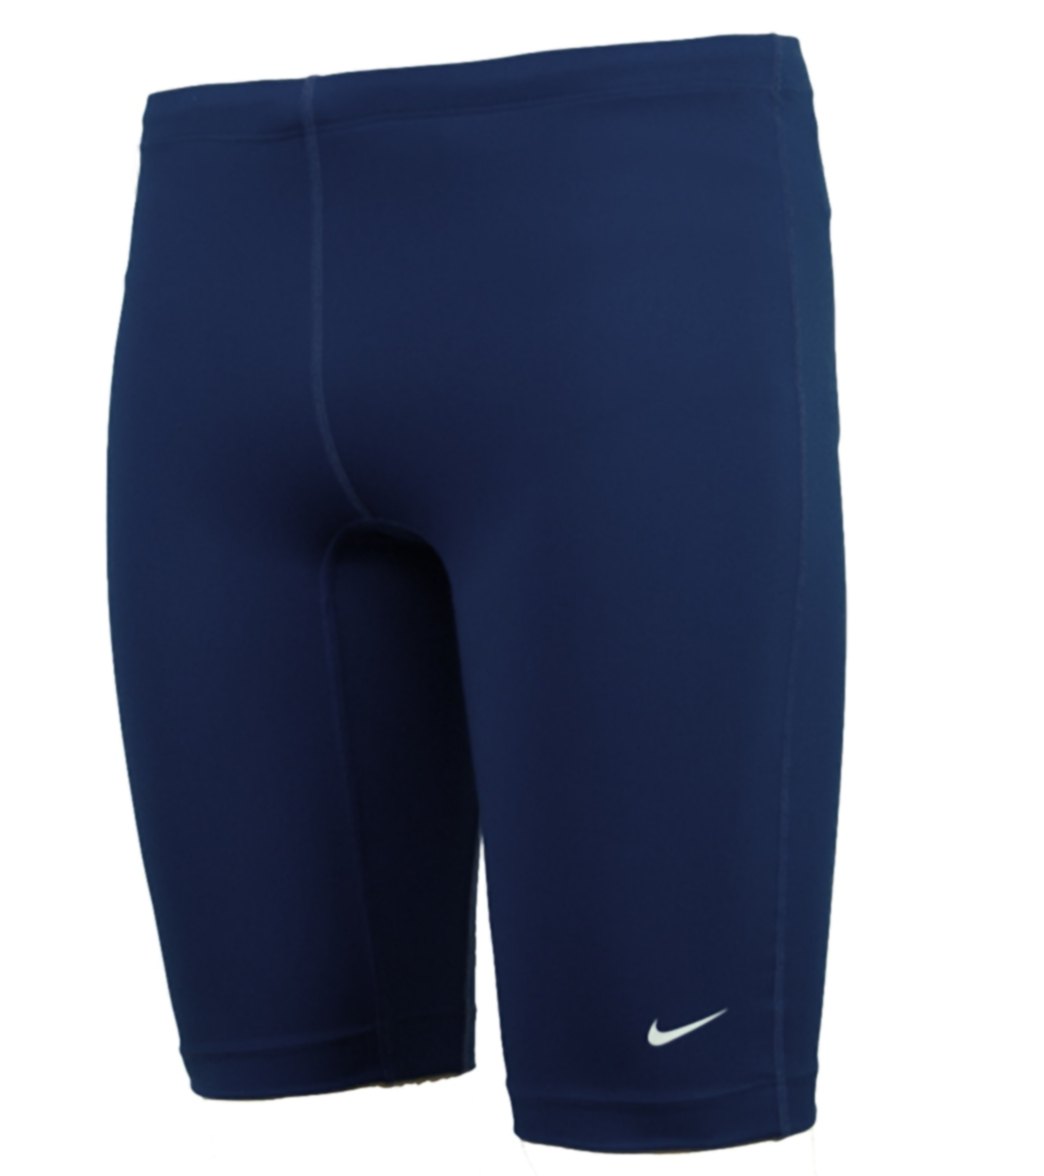 Nike Men's Solid Poly Jammer Swimsuit - Midnight Navy 20 Polyester - Swimoutlet.com